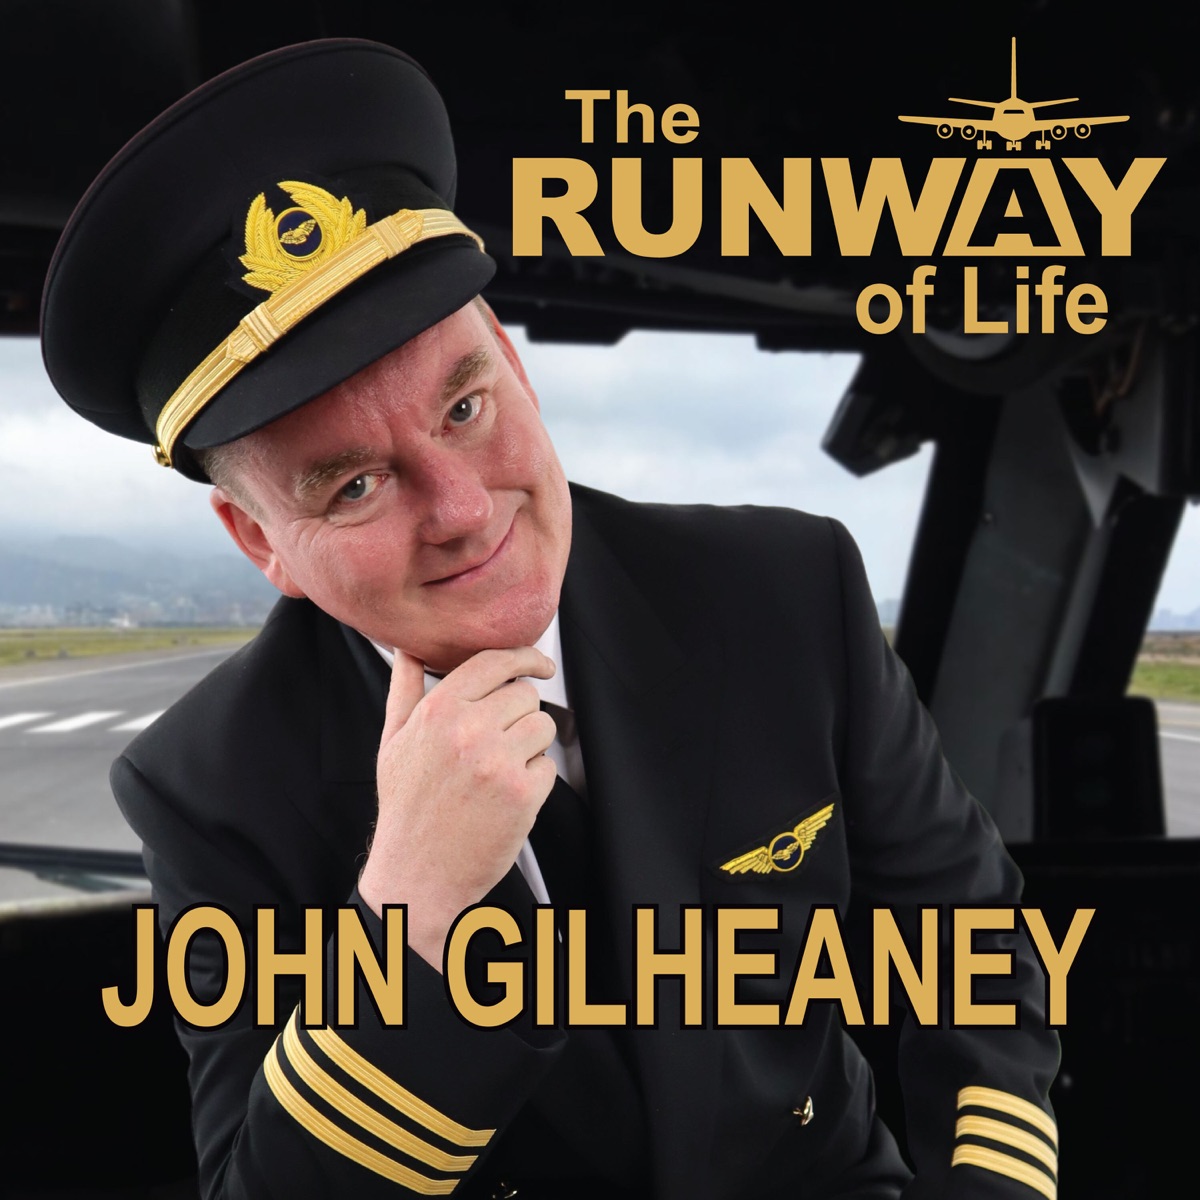 Playing Games With My Heart - Single - Album by John Gilheaney - Apple Music